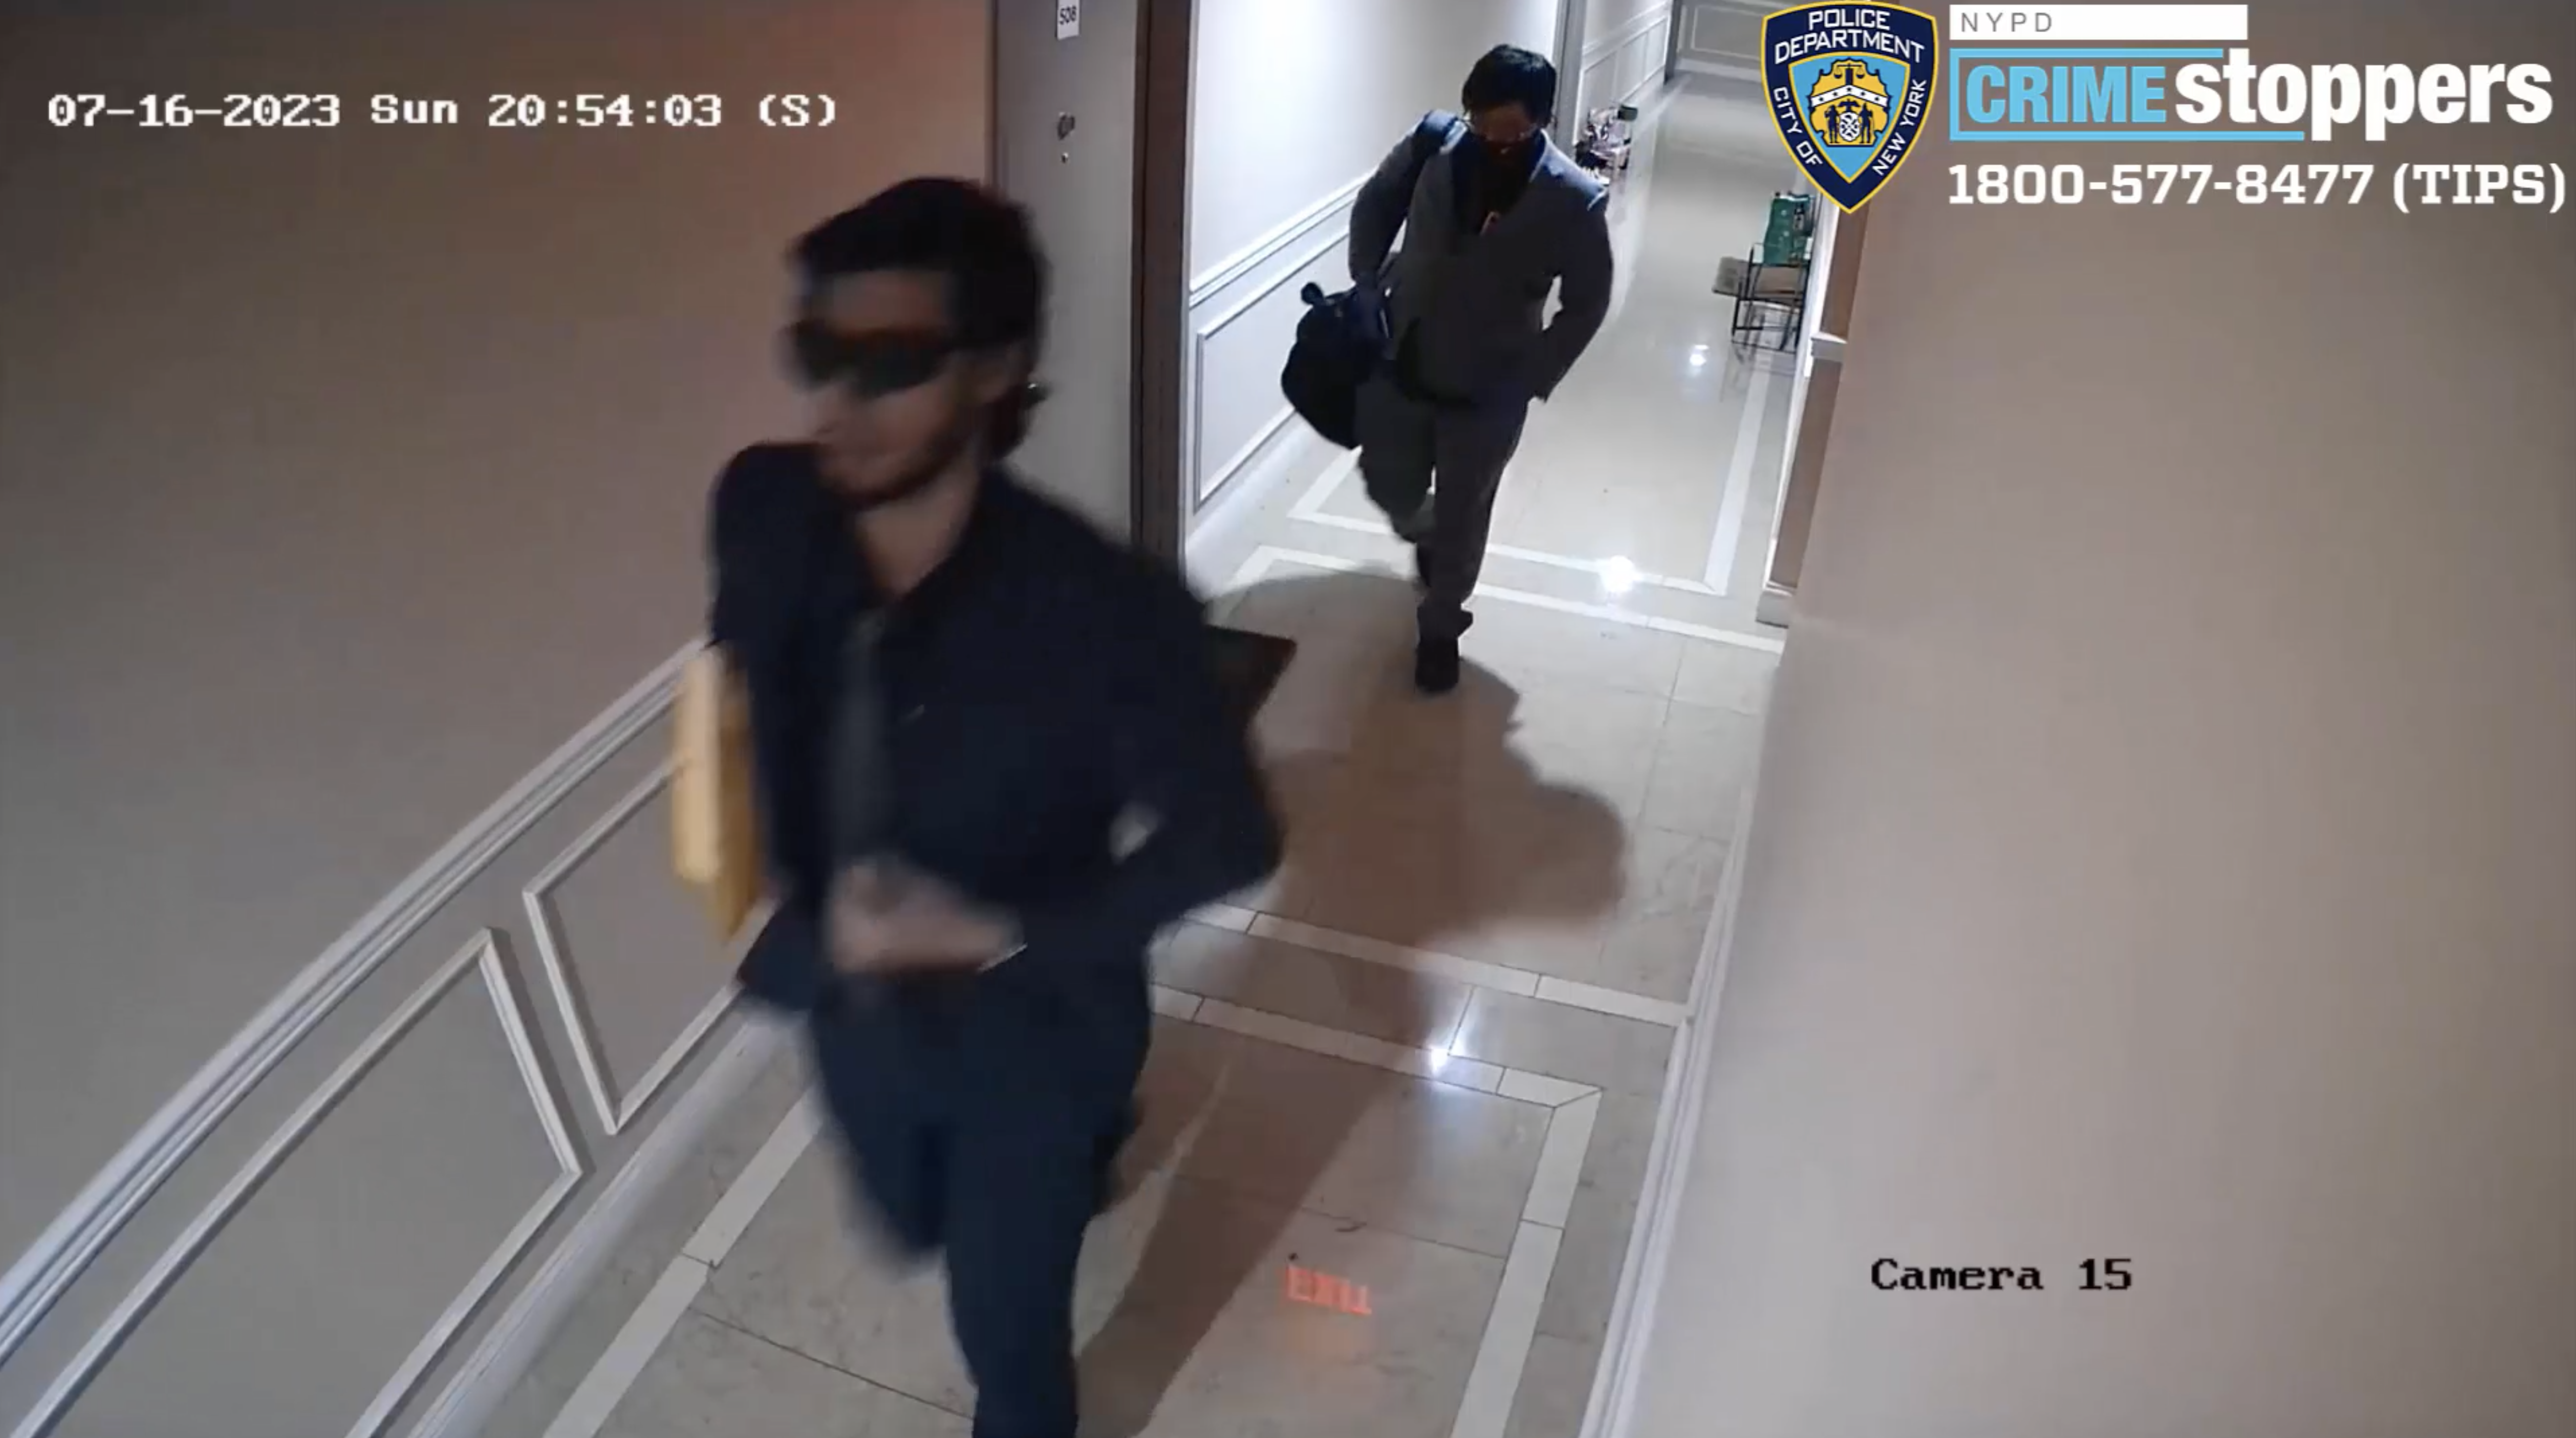 Crooks posed as FBI agents before using Taser to subdue, tie up victims in Flushing home invasion NYPD image